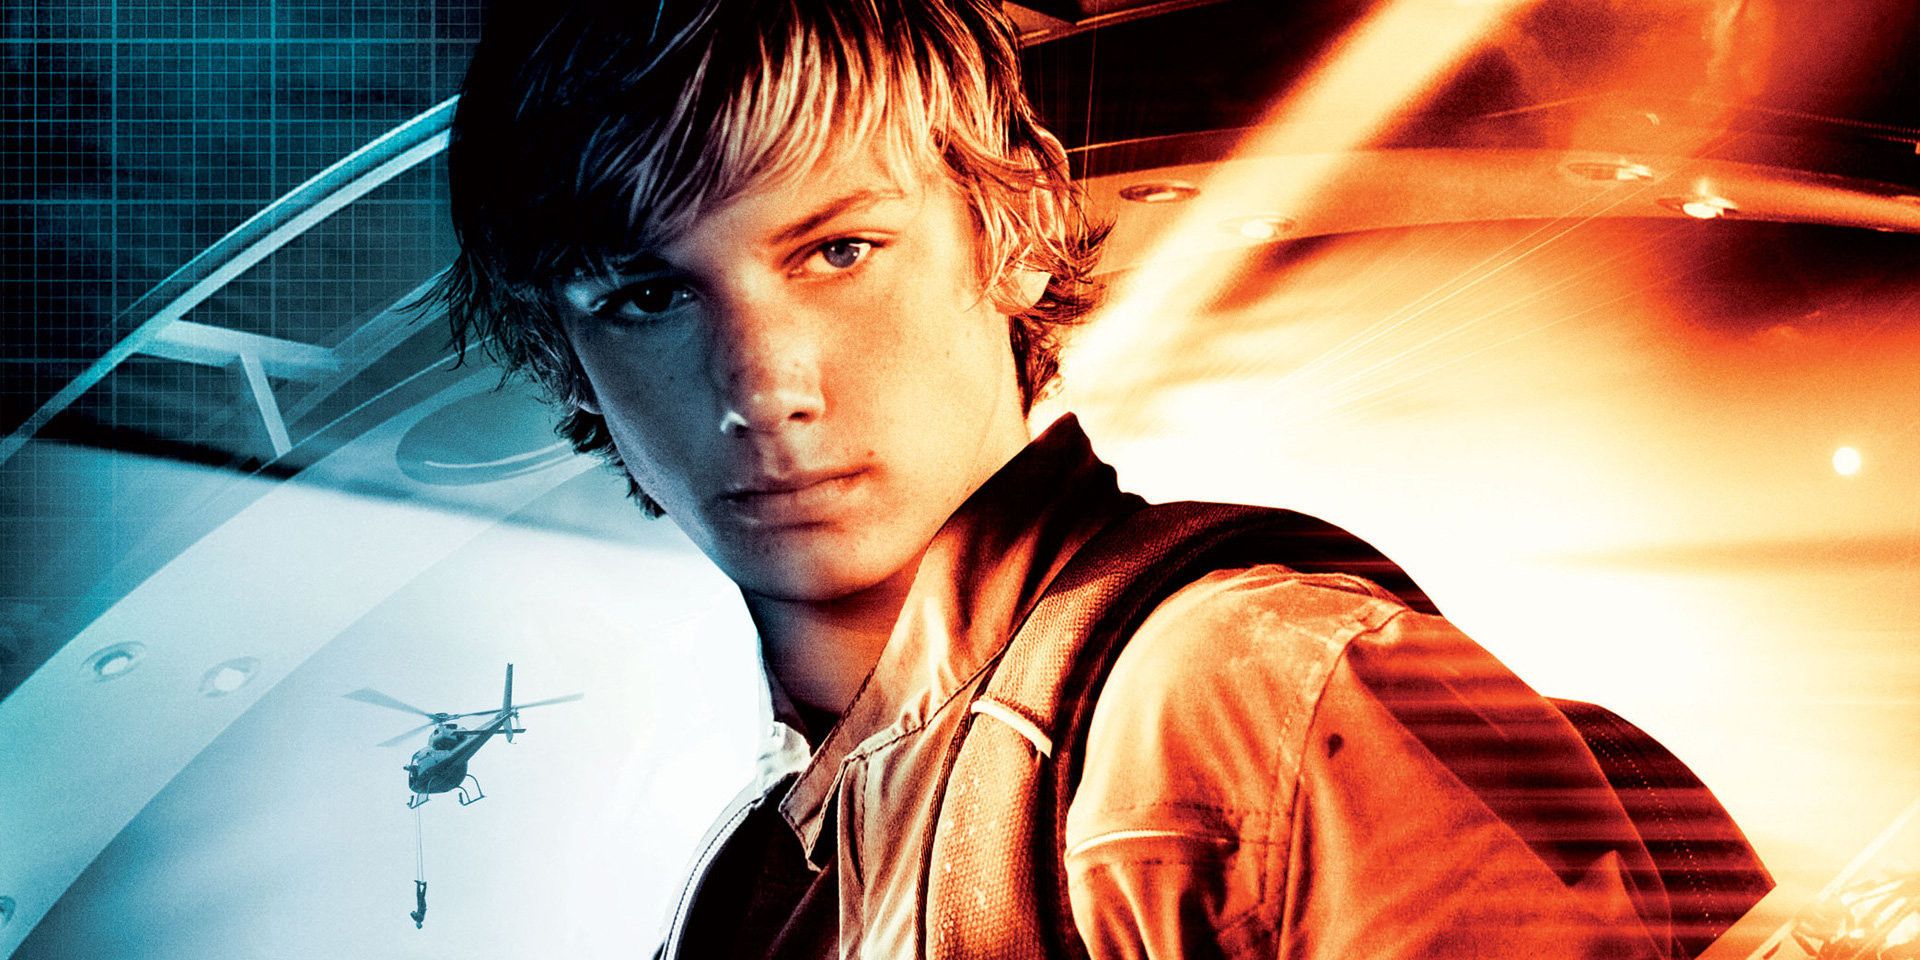 Alex Rider from the IMDbTV series of the same name.